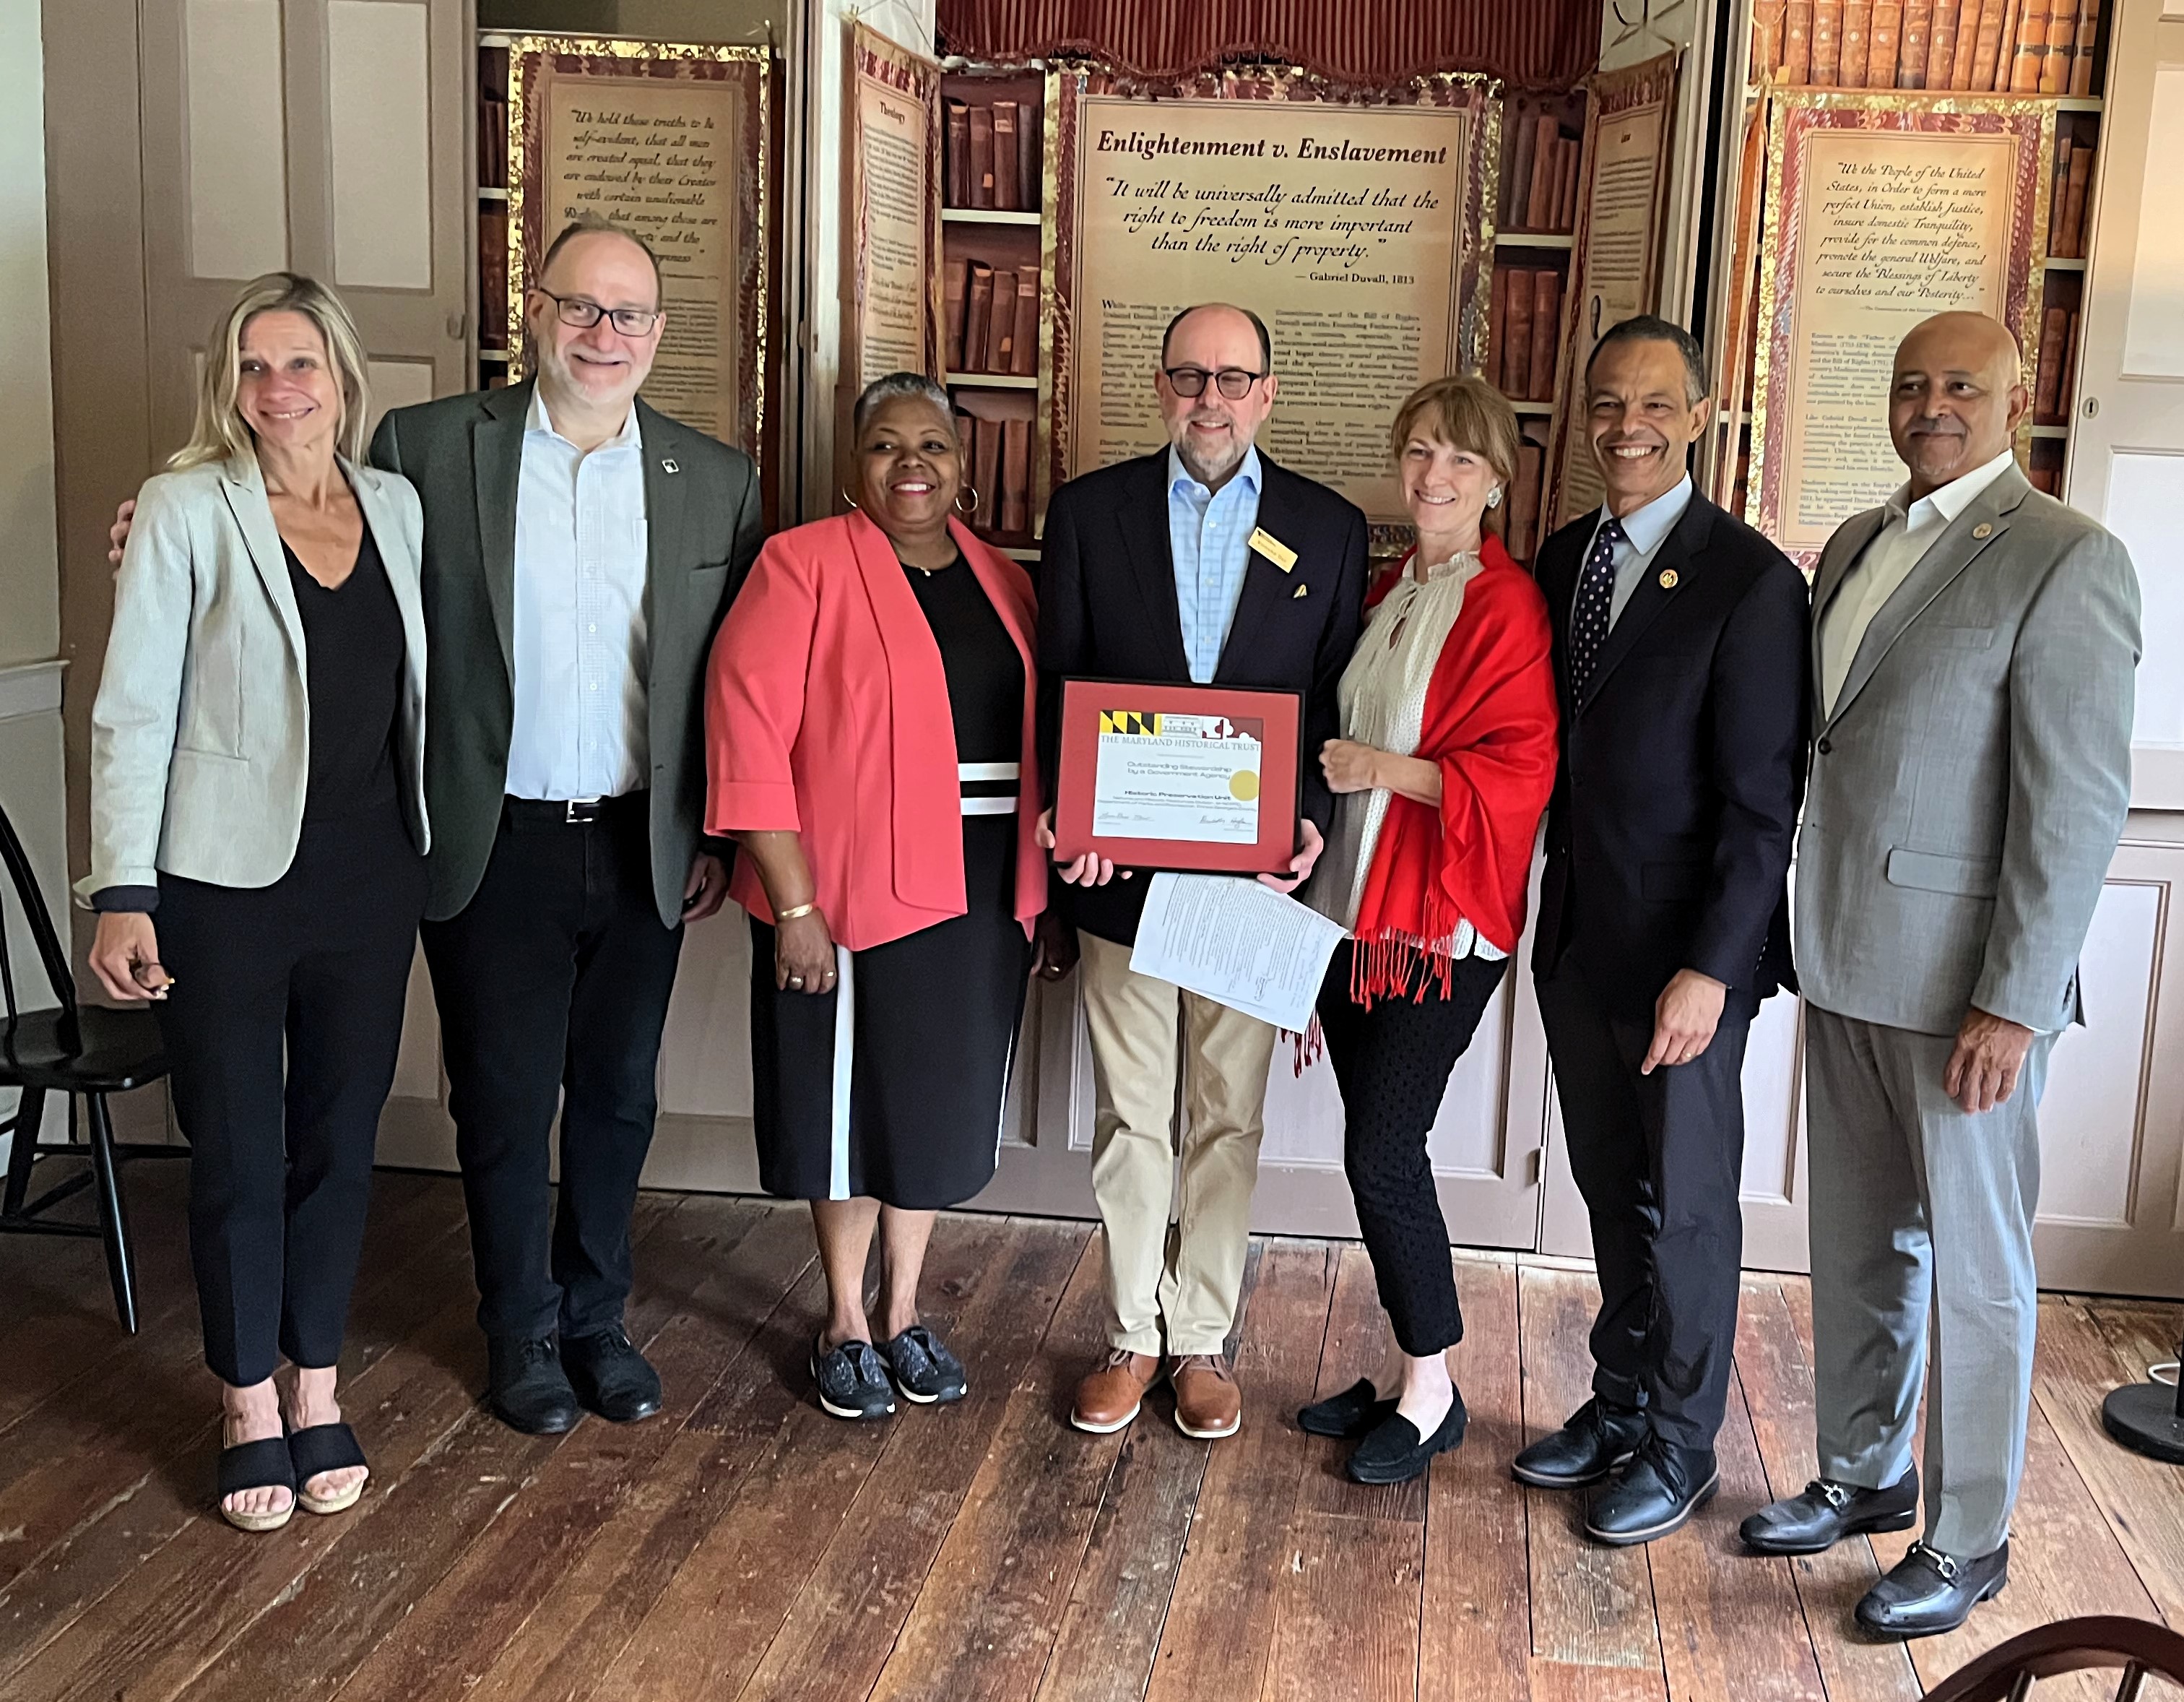 M-NCPPC, Department of Parks and Recreation in Prince George’s County Honored with Historic Preservation Award